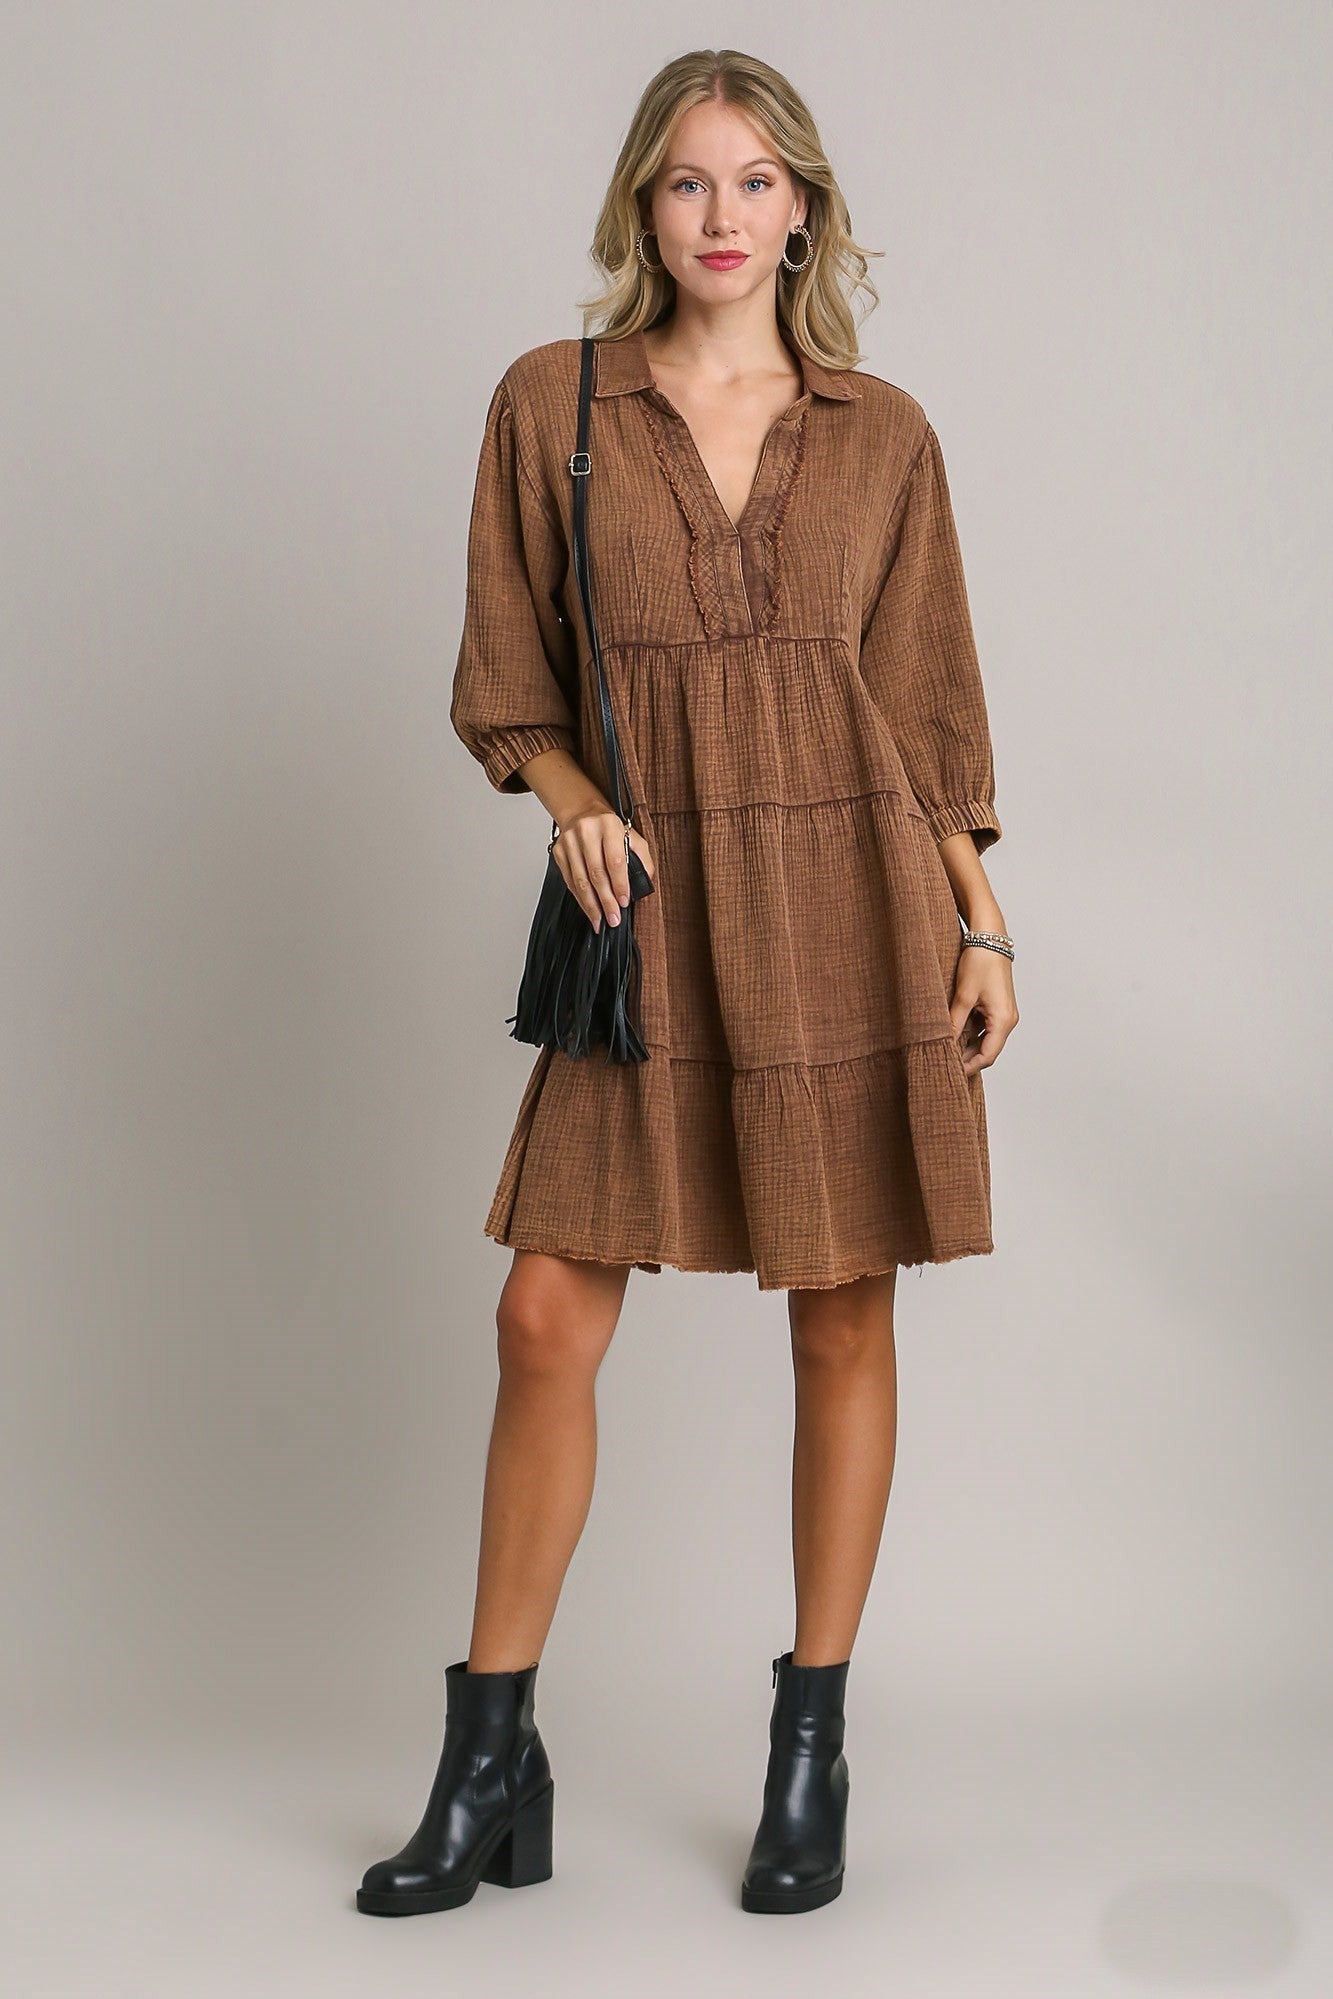 Umgee Snow Washed Cotton Gauze Dress in Brown – June Adel